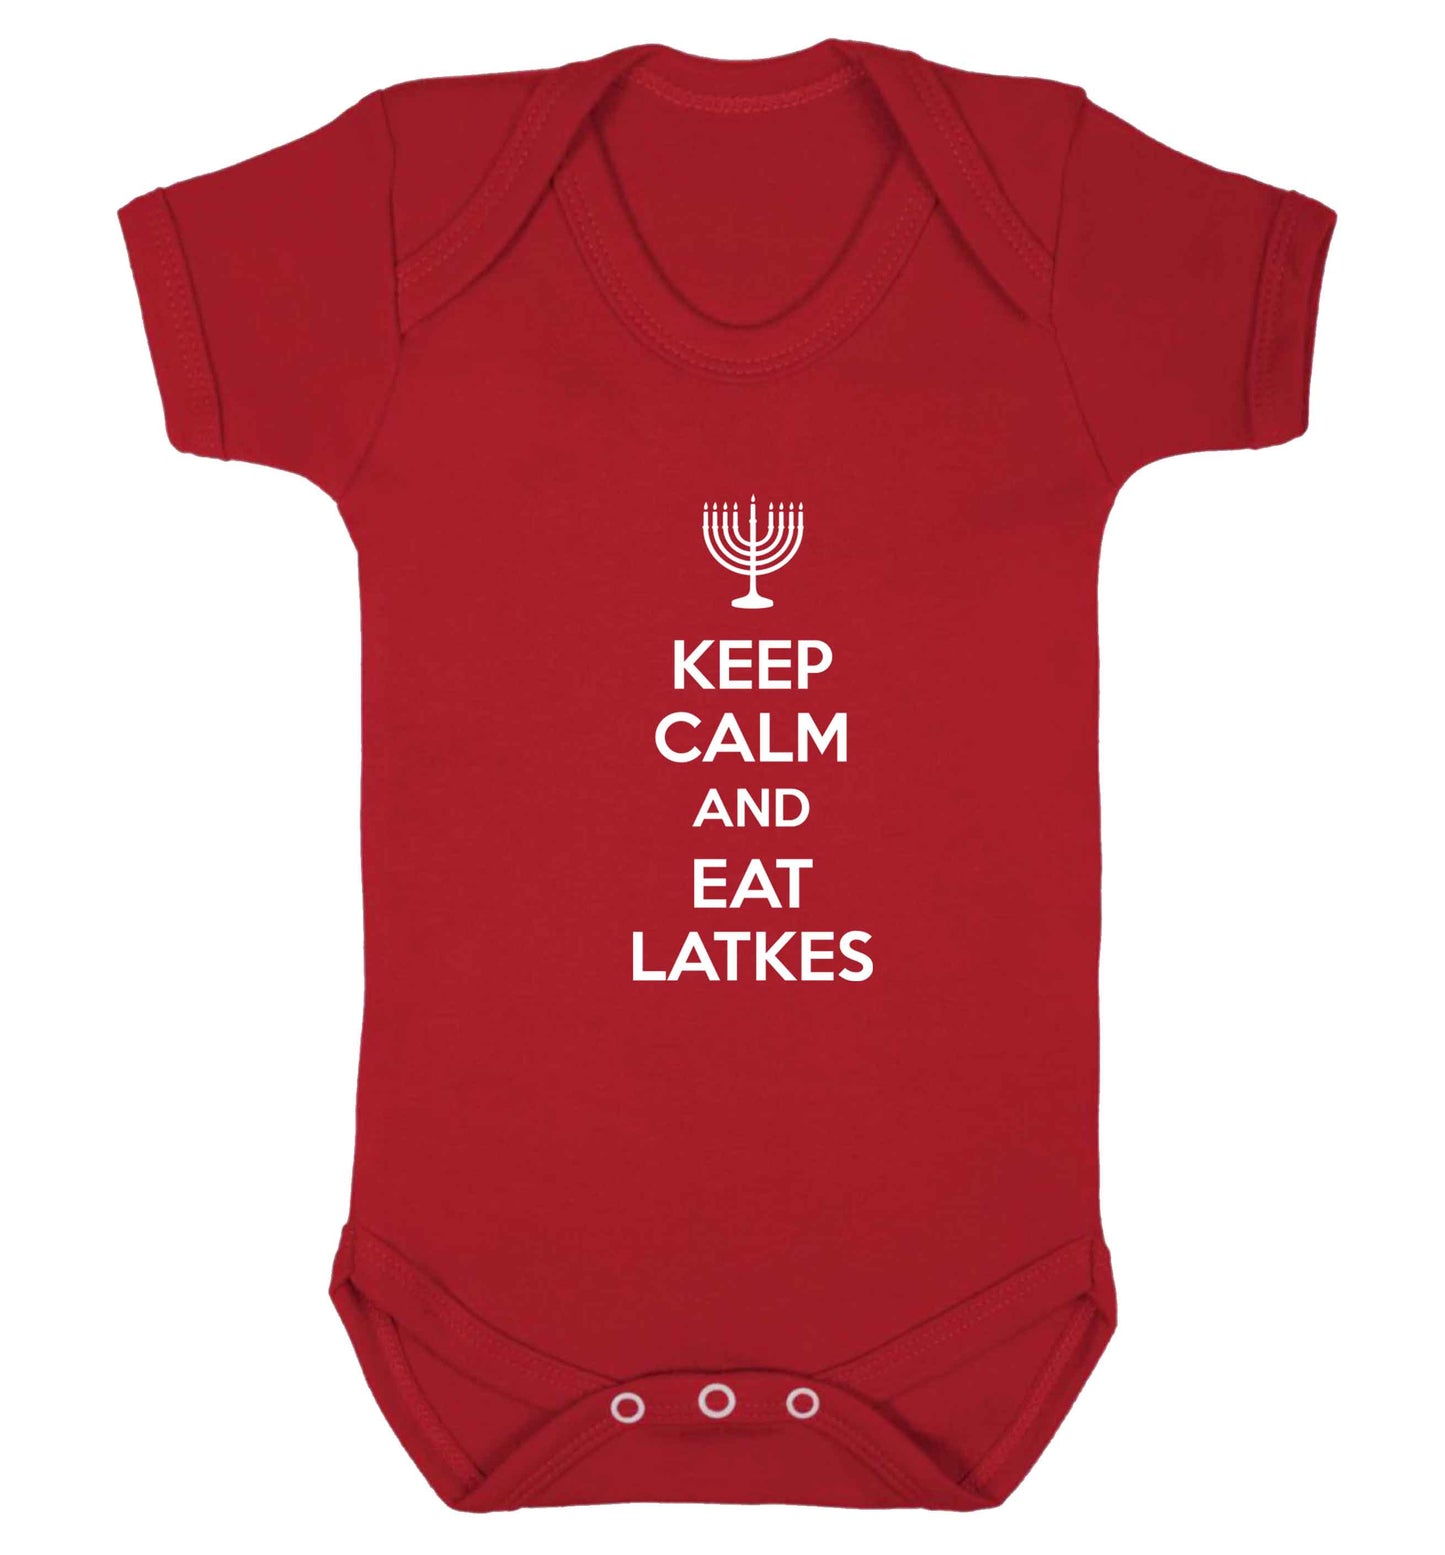 Keep calm and eat latkes baby vest red 18-24 months